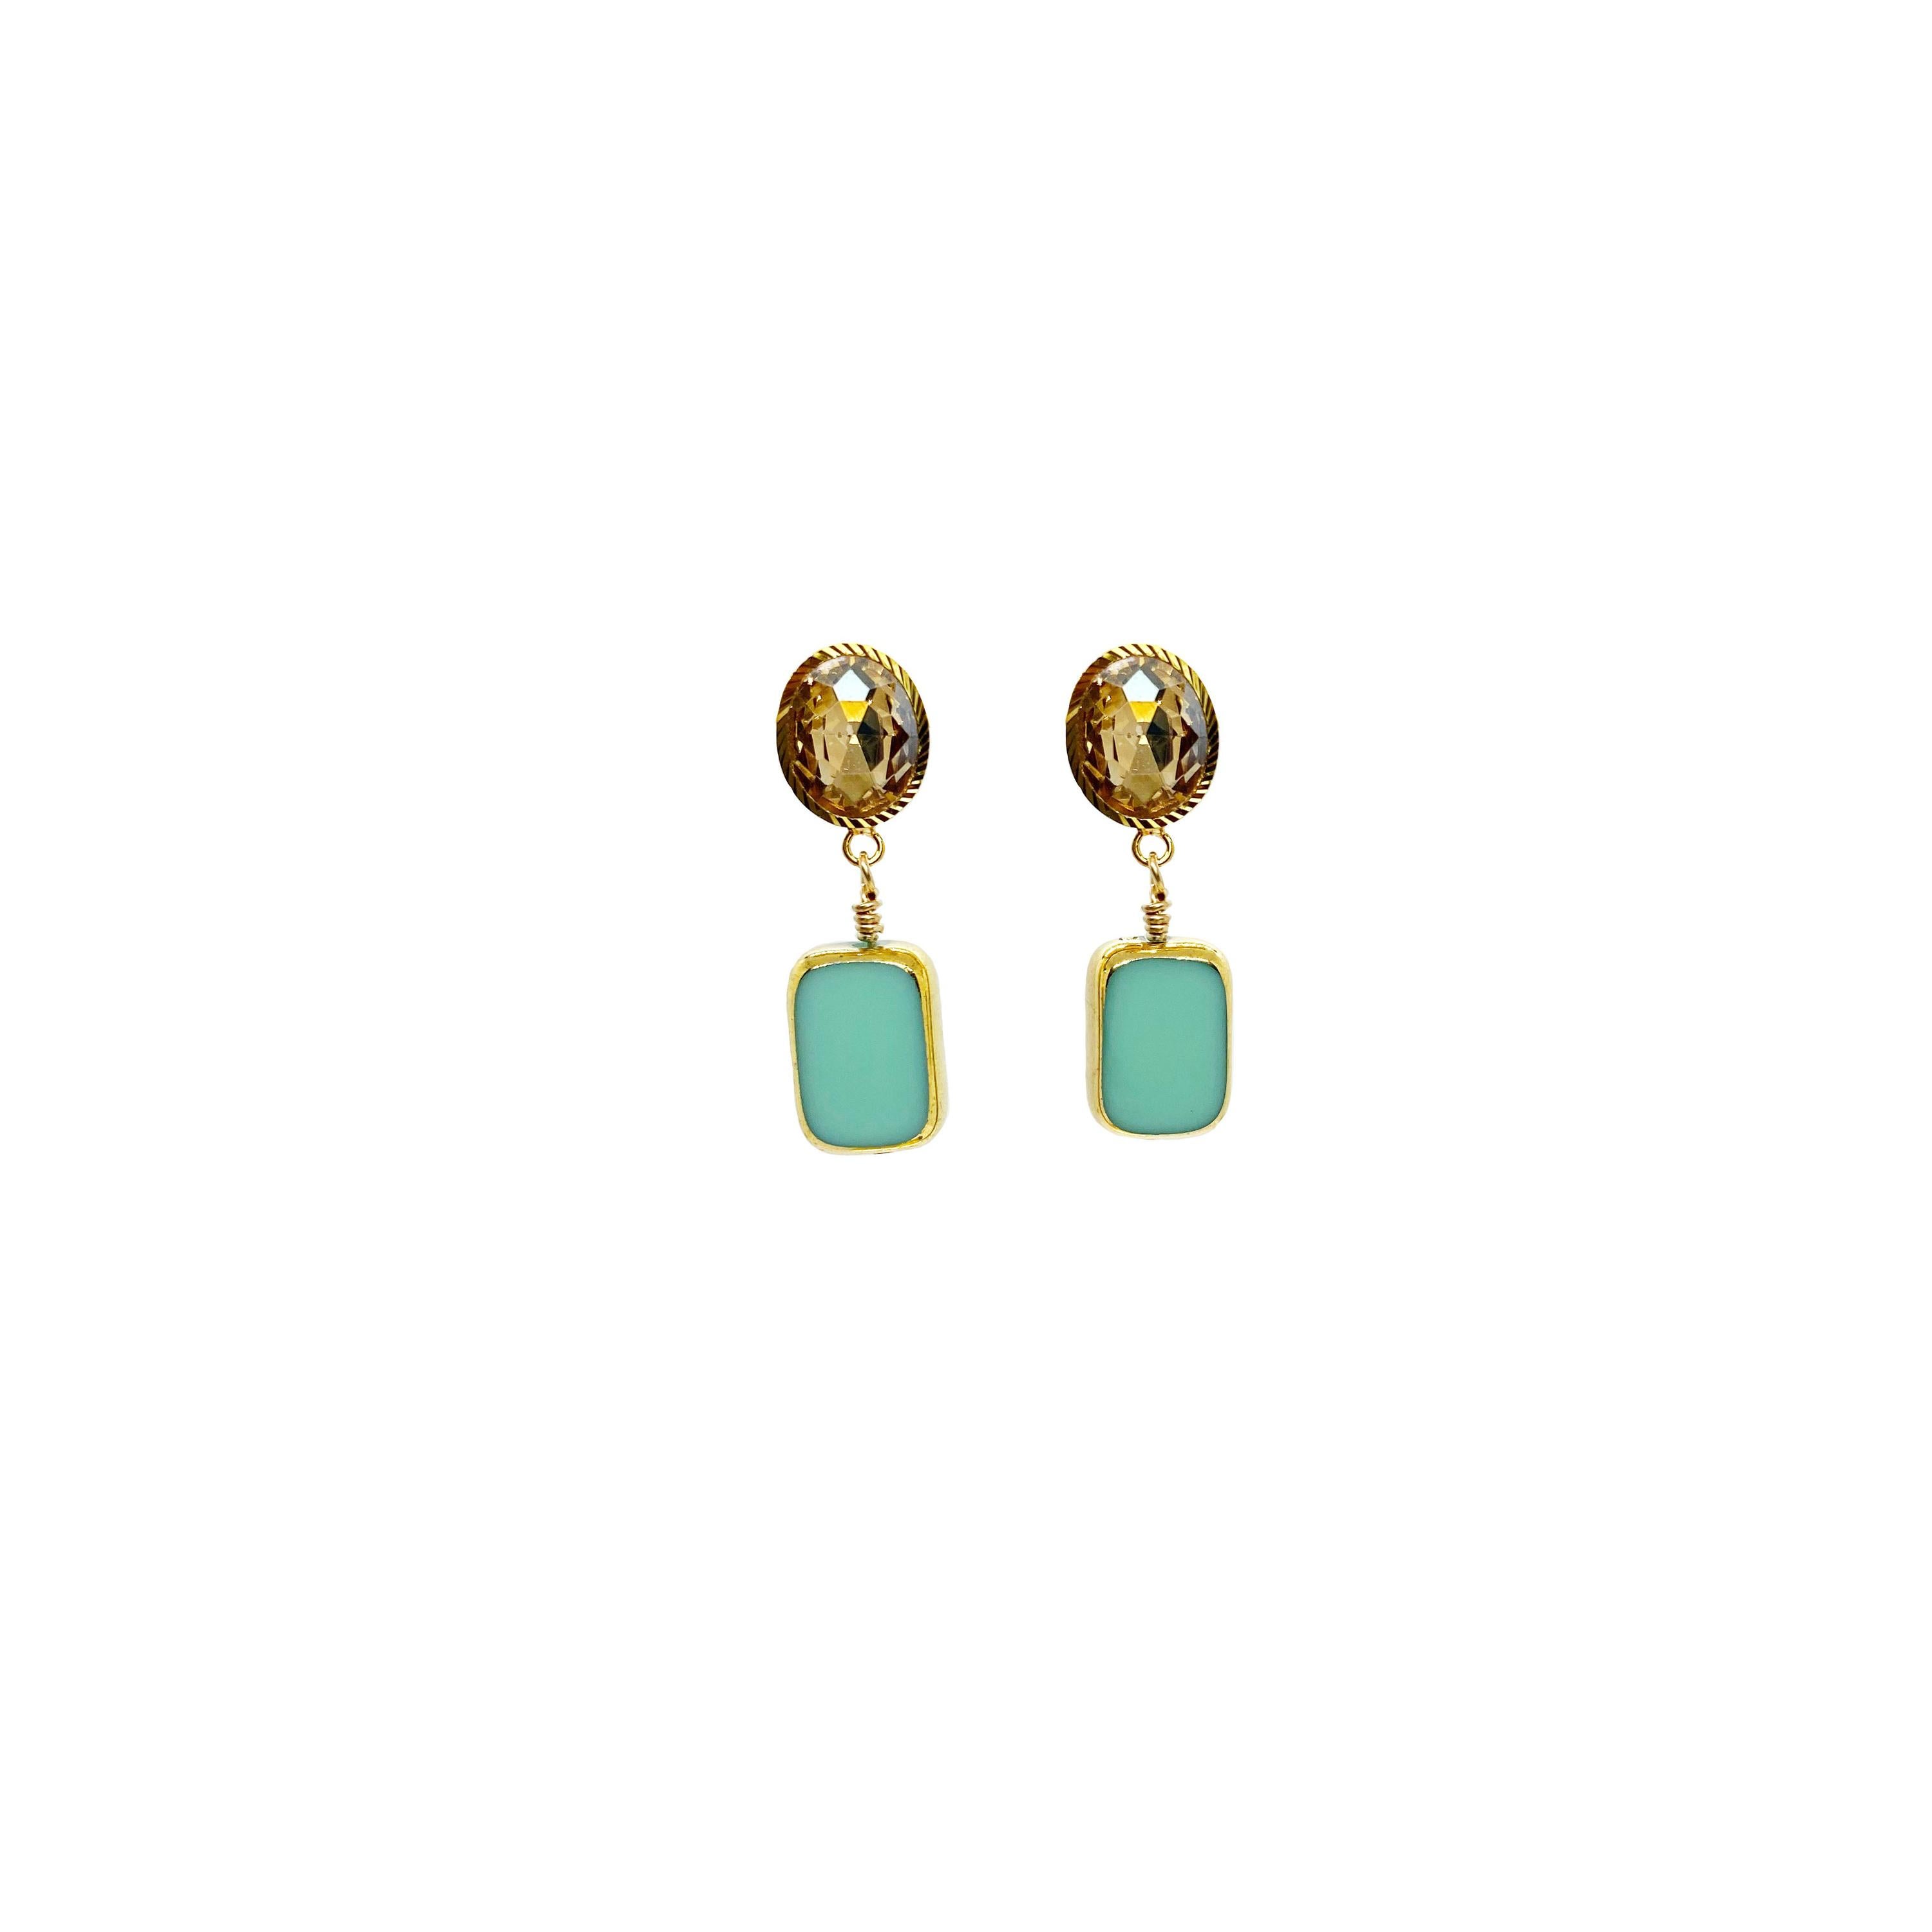 Vintage German Glass Beads edged with 24K gold, Sea Foam Green Earrings For Sale